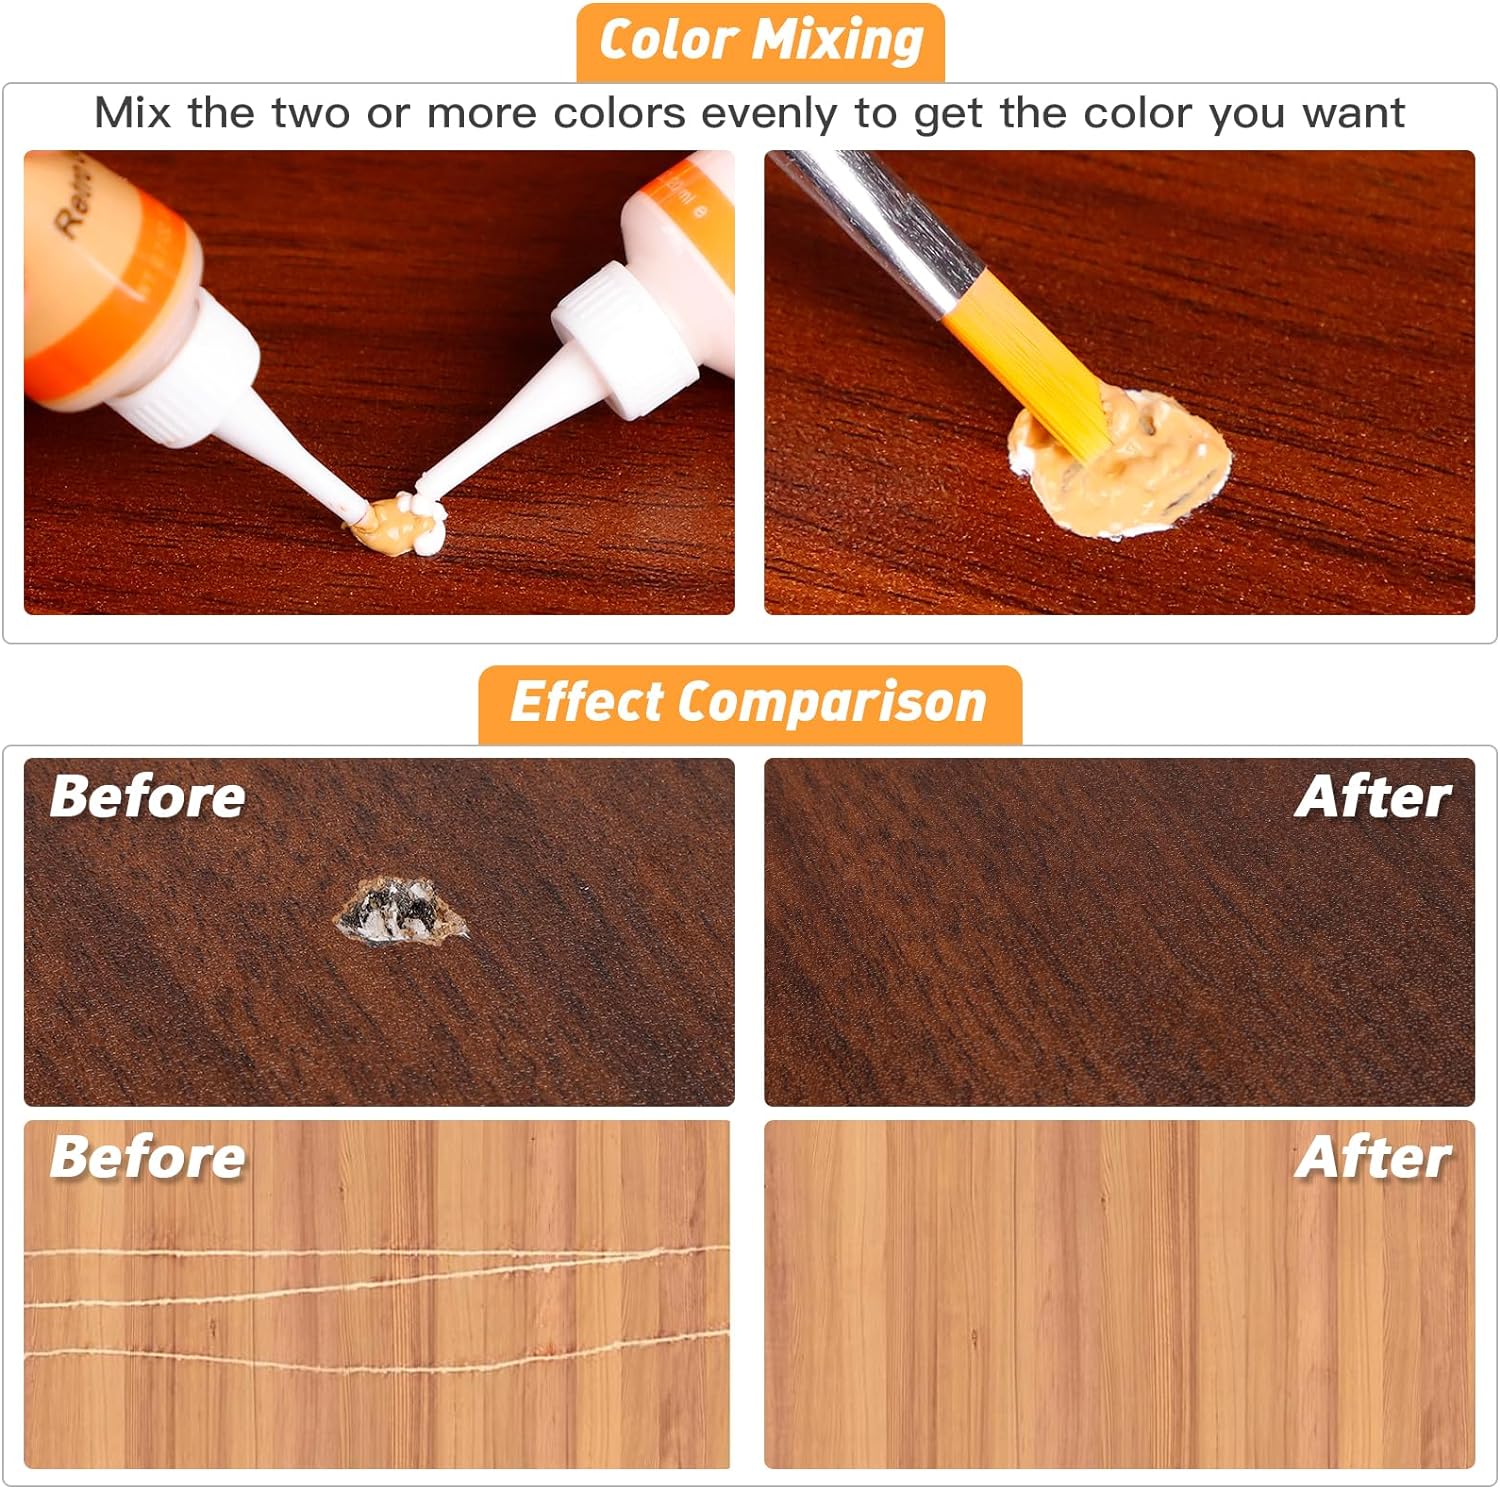 DEWEL Wood Repair Kit, Wood Scratch Repair for Oak Colors Series Furniture, 6 Colors Furniture Touch up Markers and Wood Fillers for Scratches, Cracks, Wood Floor, Cabinet, Table : Health & Household